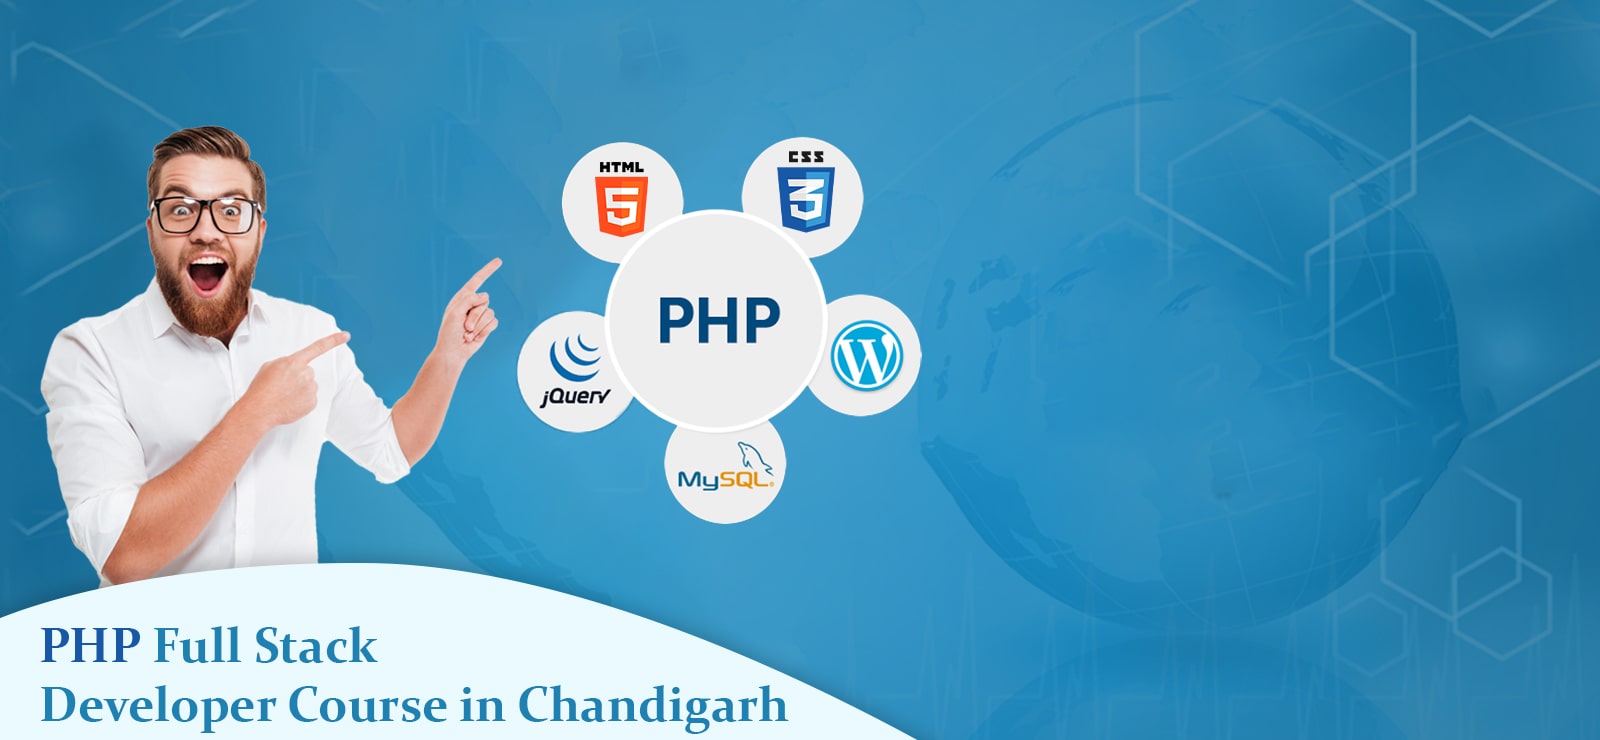 PHP Full Stack Developer Course in Chandigarh